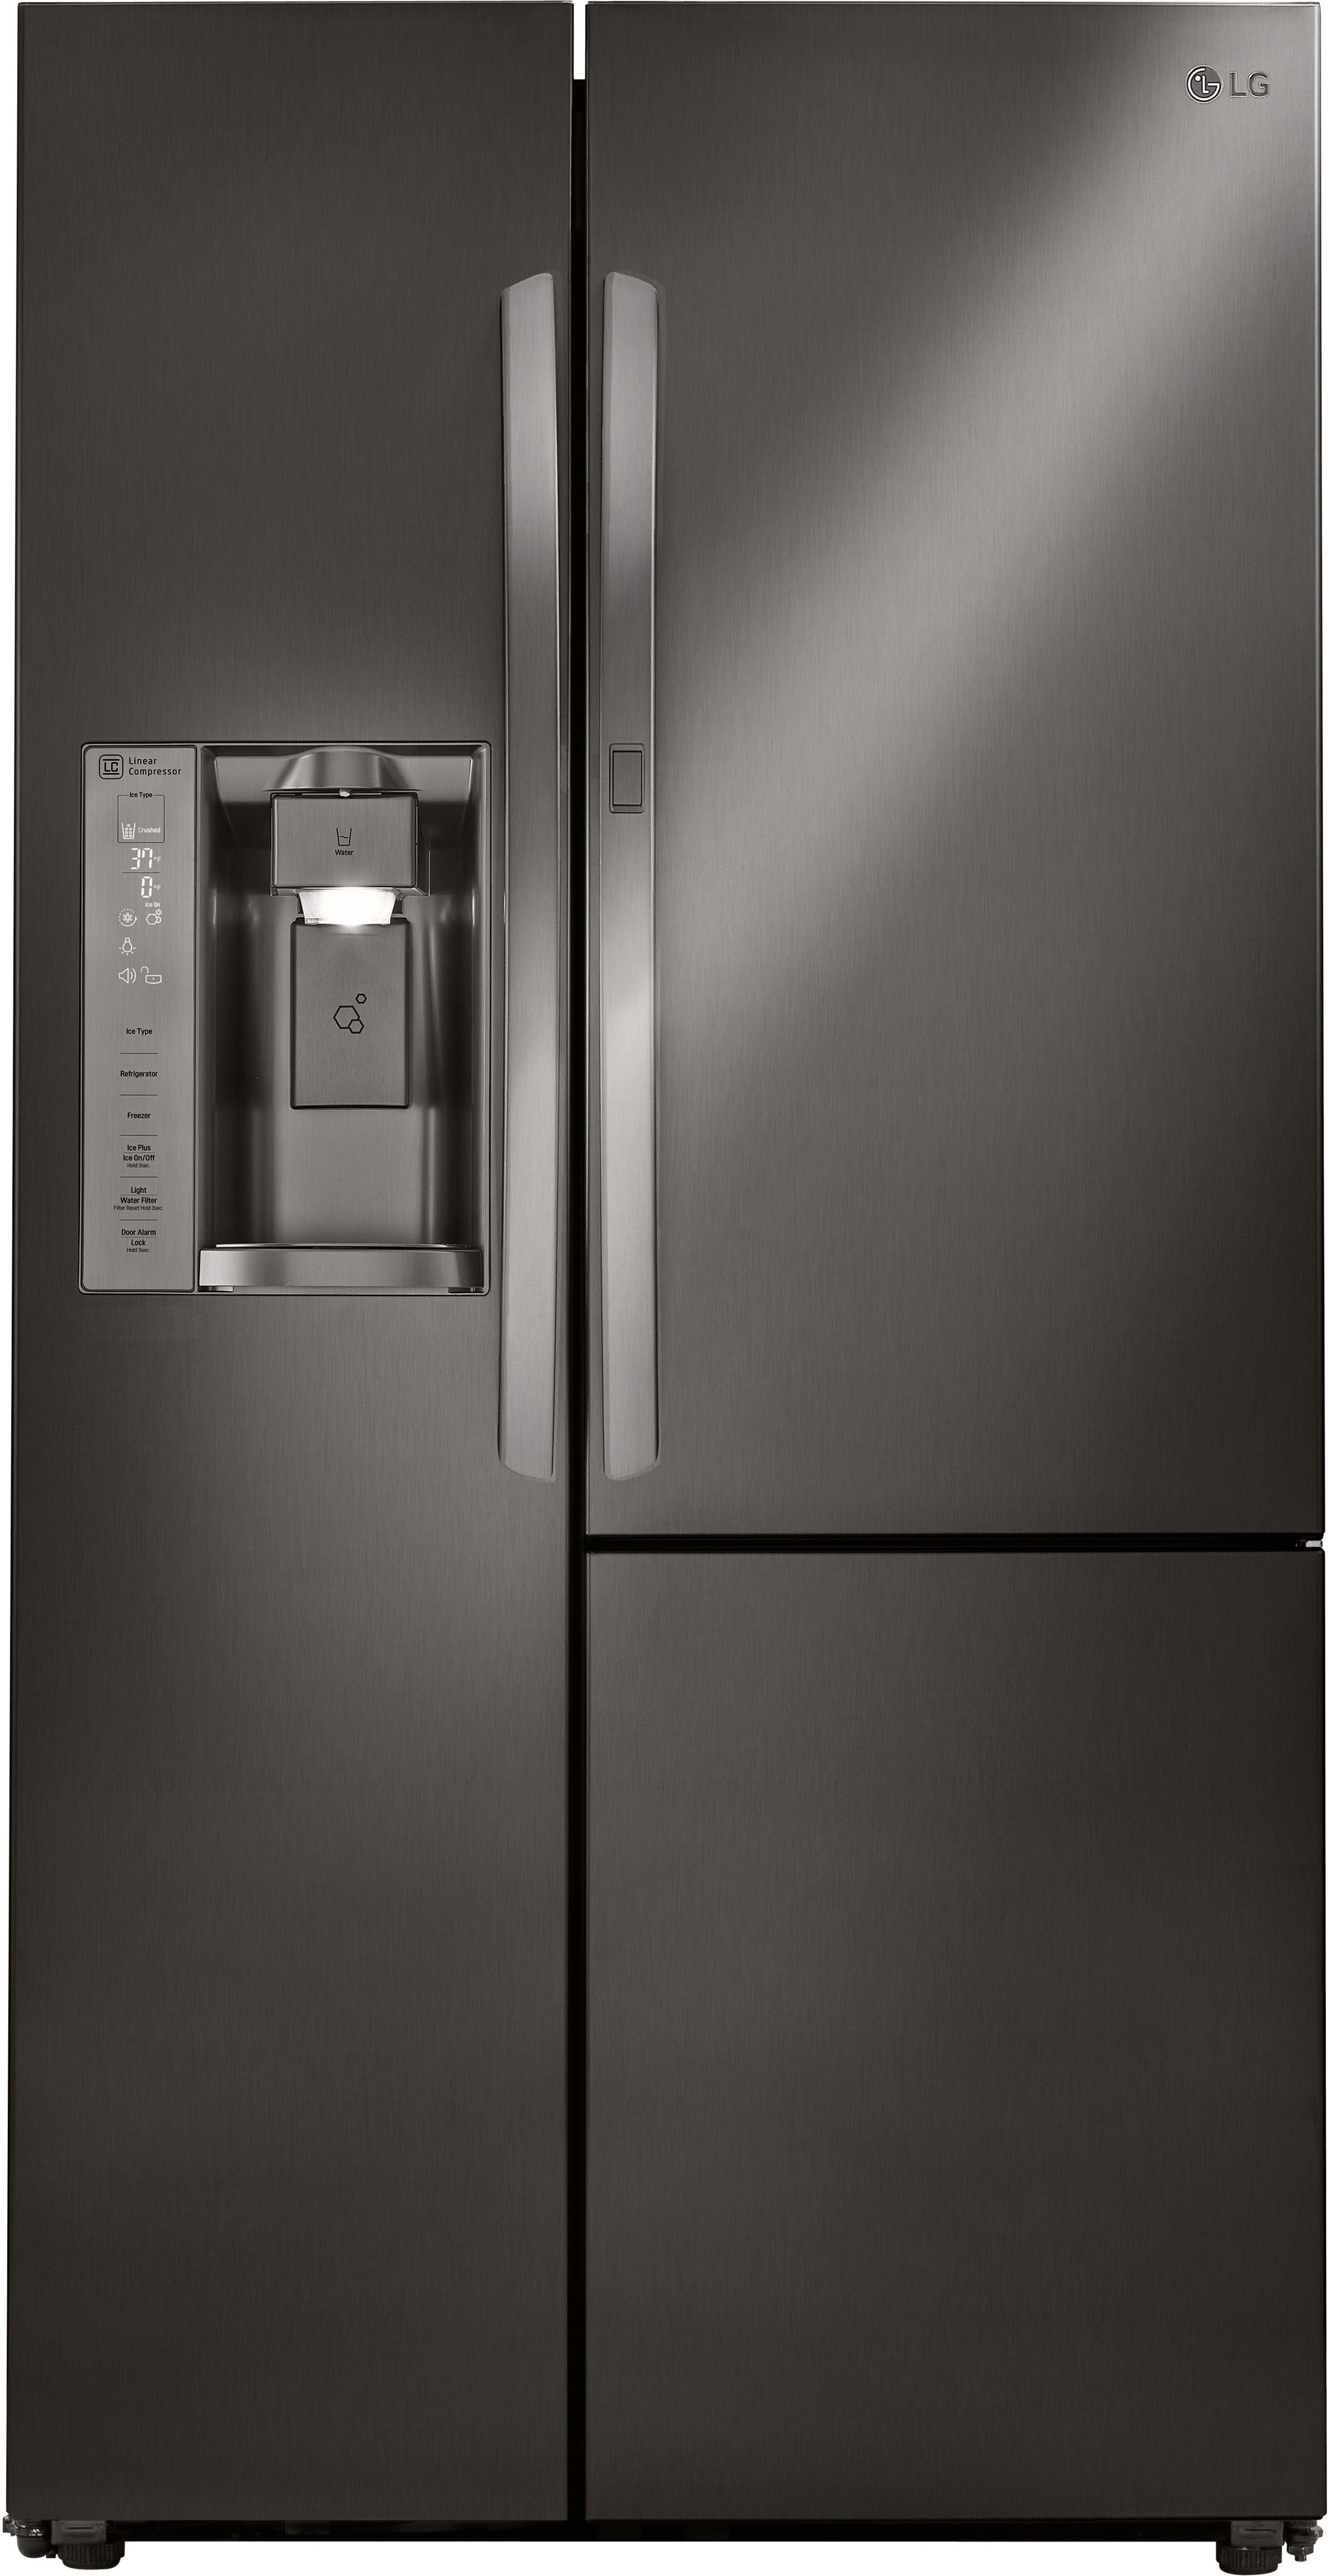 LG 26.1 Cu. Ft. Black Stainless Steel Side-By-Side Refrigerator